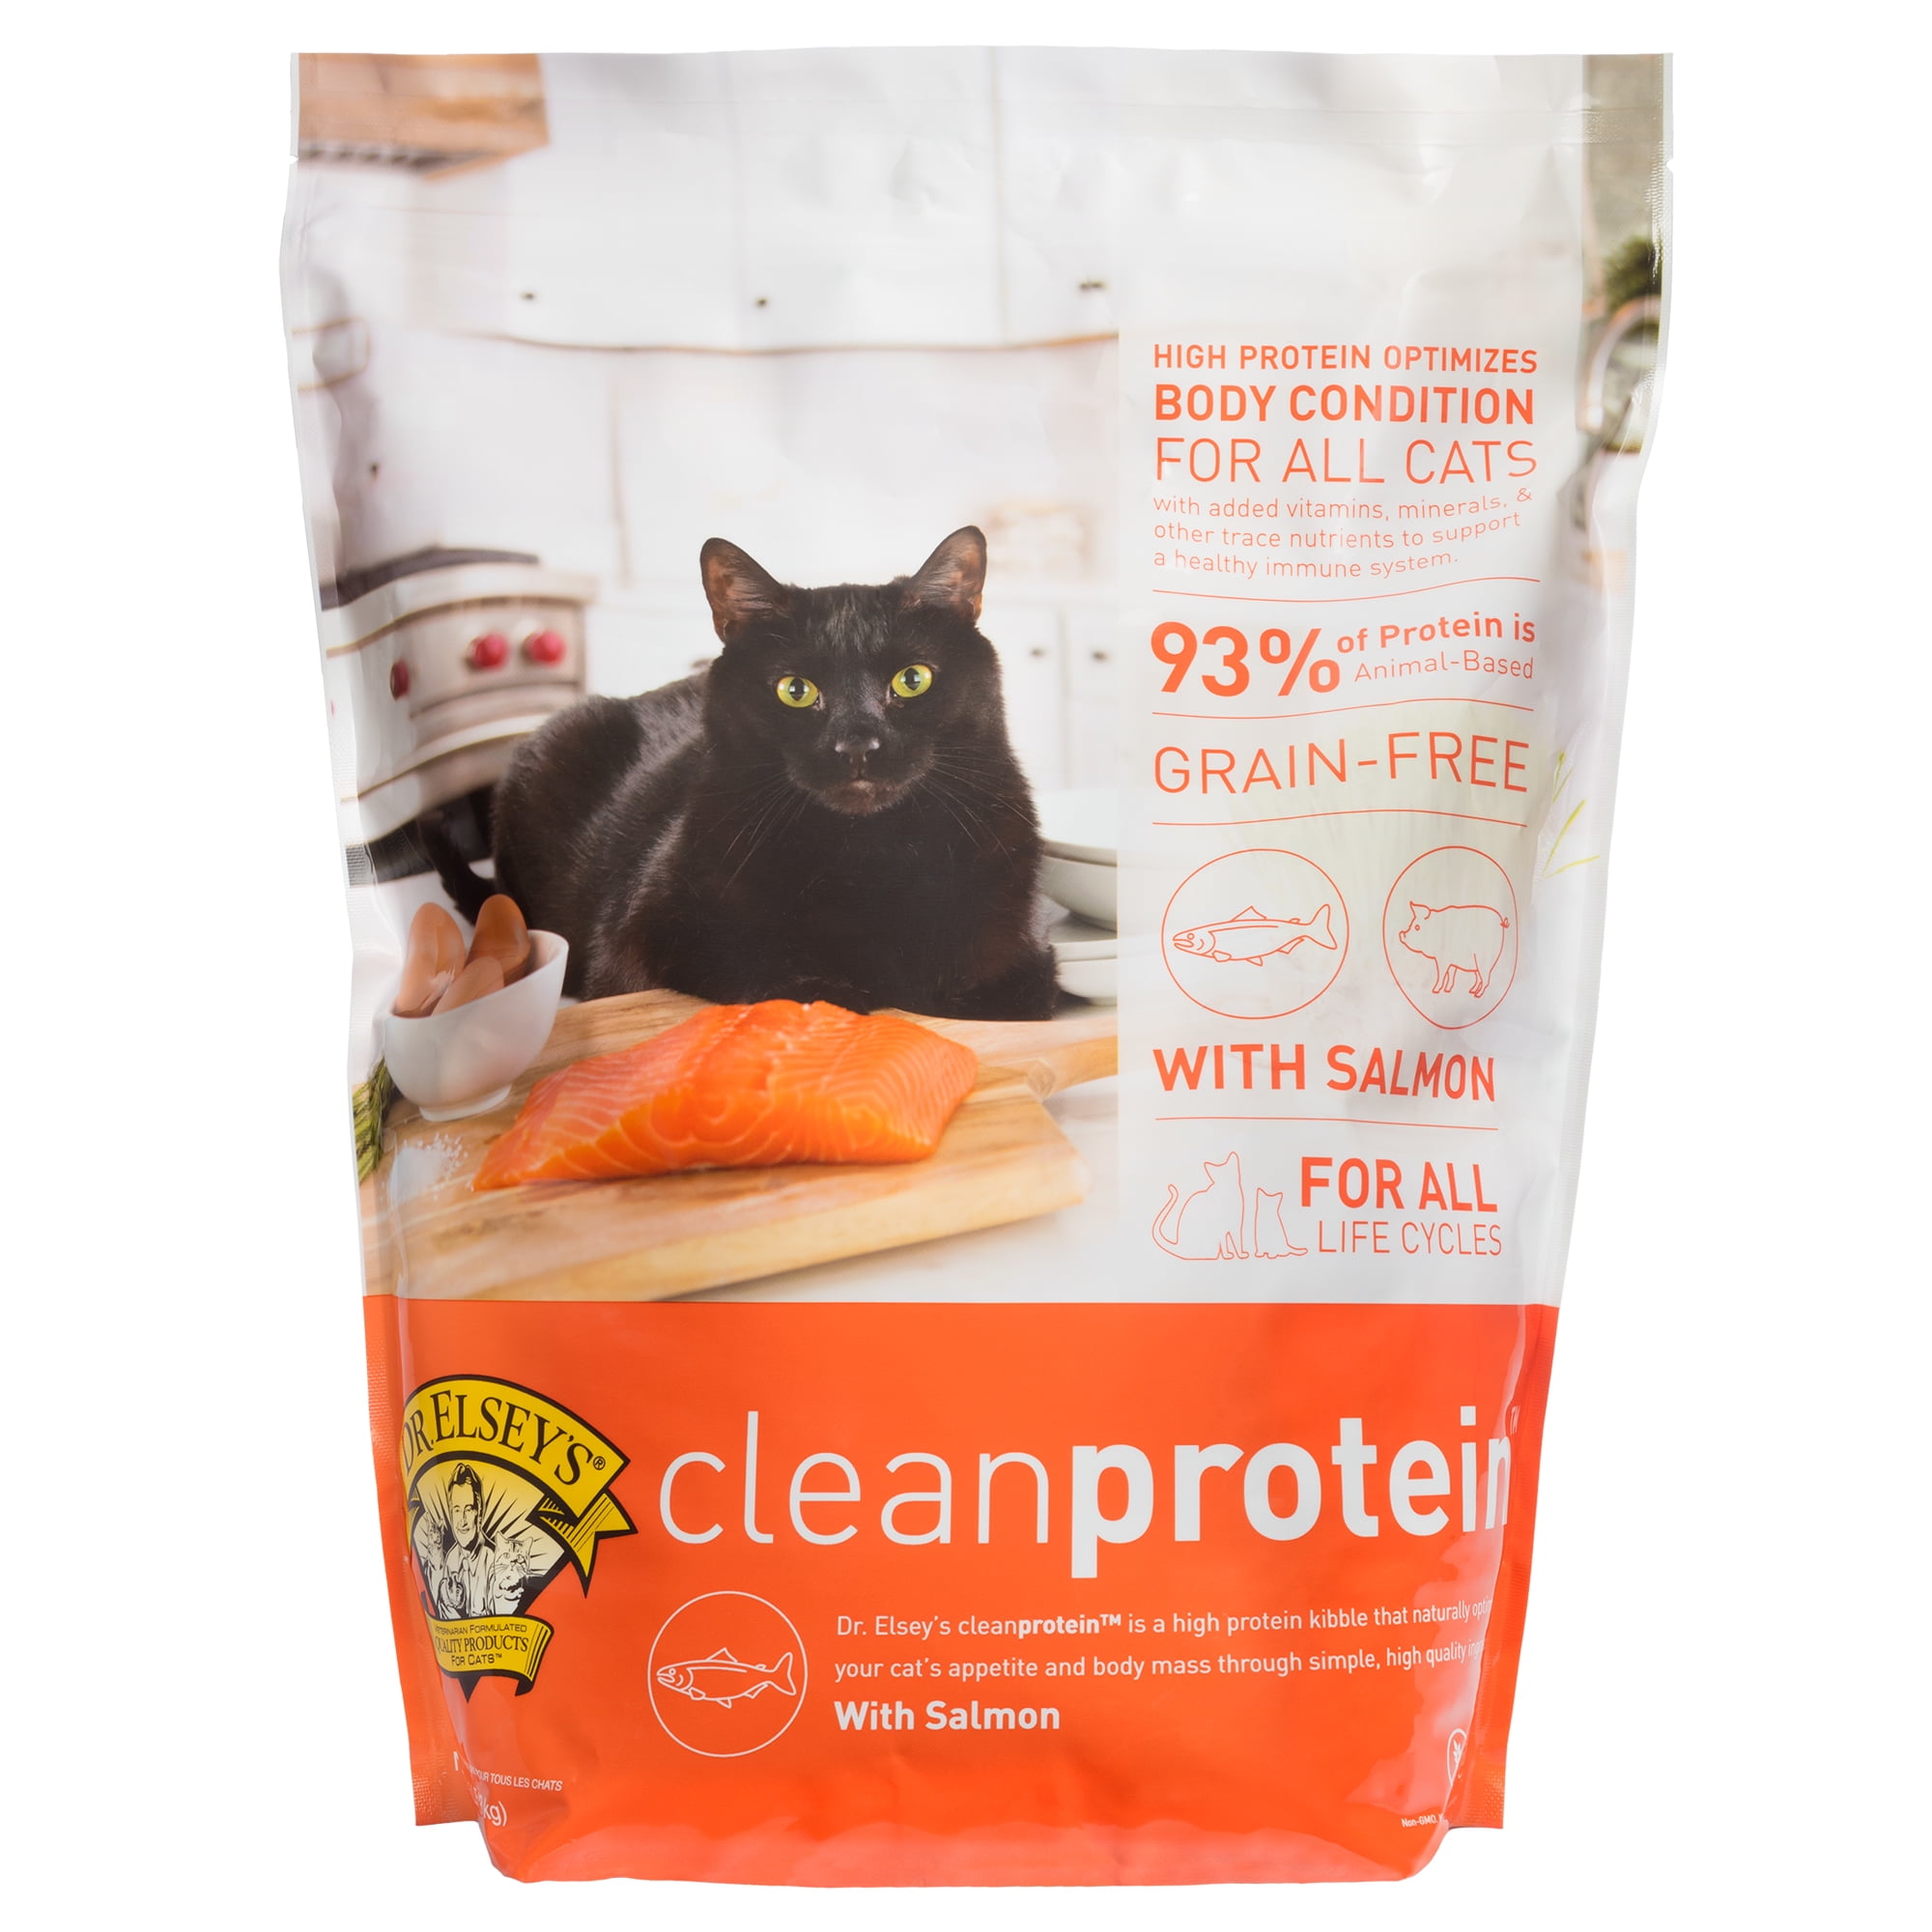 Dr. Elsey's cleanprotein Dry Cat Food Salmon 6.6lb